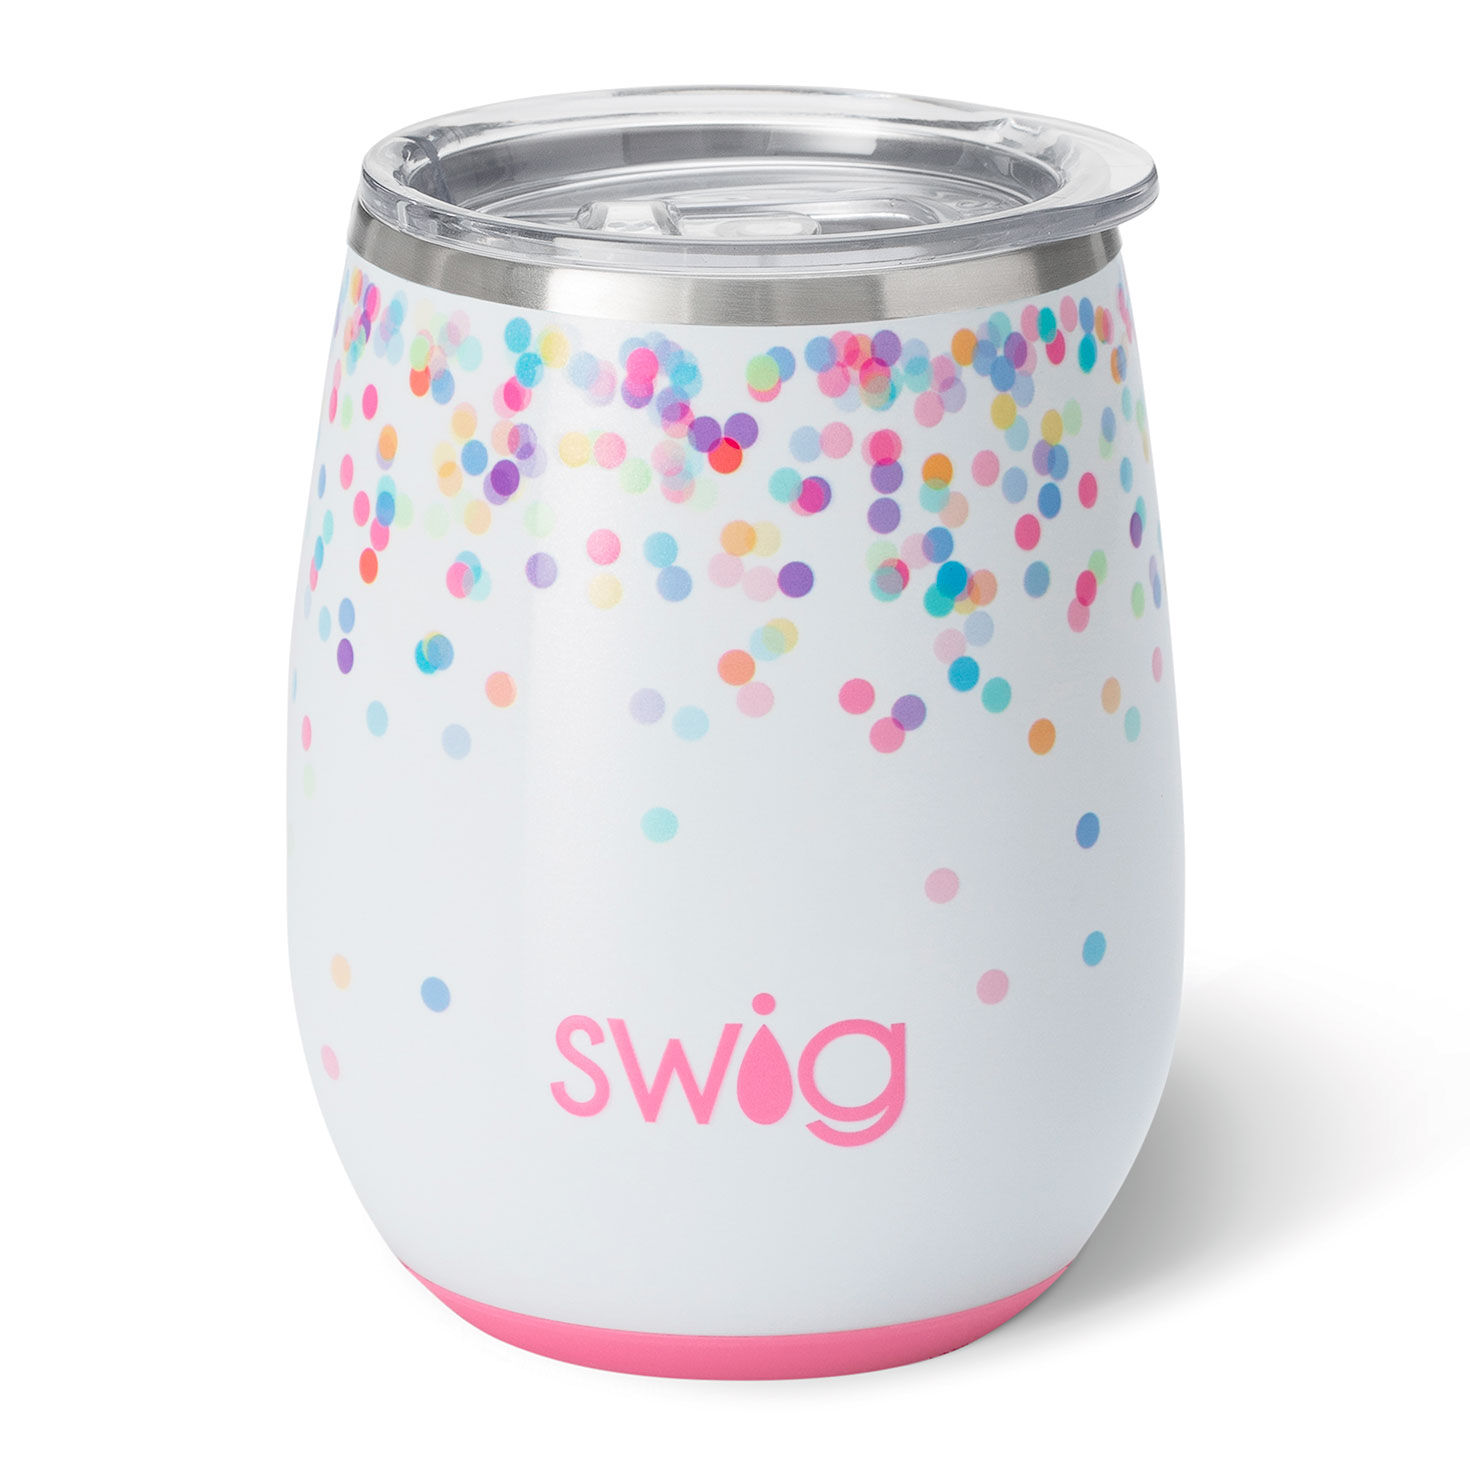 https://www.hallmark.com/dw/image/v2/AALB_PRD/on/demandware.static/-/Sites-hallmark-master/default/dw0746aadc/images/finished-goods/products/S102C14CN/Mini-Dots-on-White-Insulated-Stemless-Wine-Glass_S102C14CN_01.jpg?sfrm=jpg